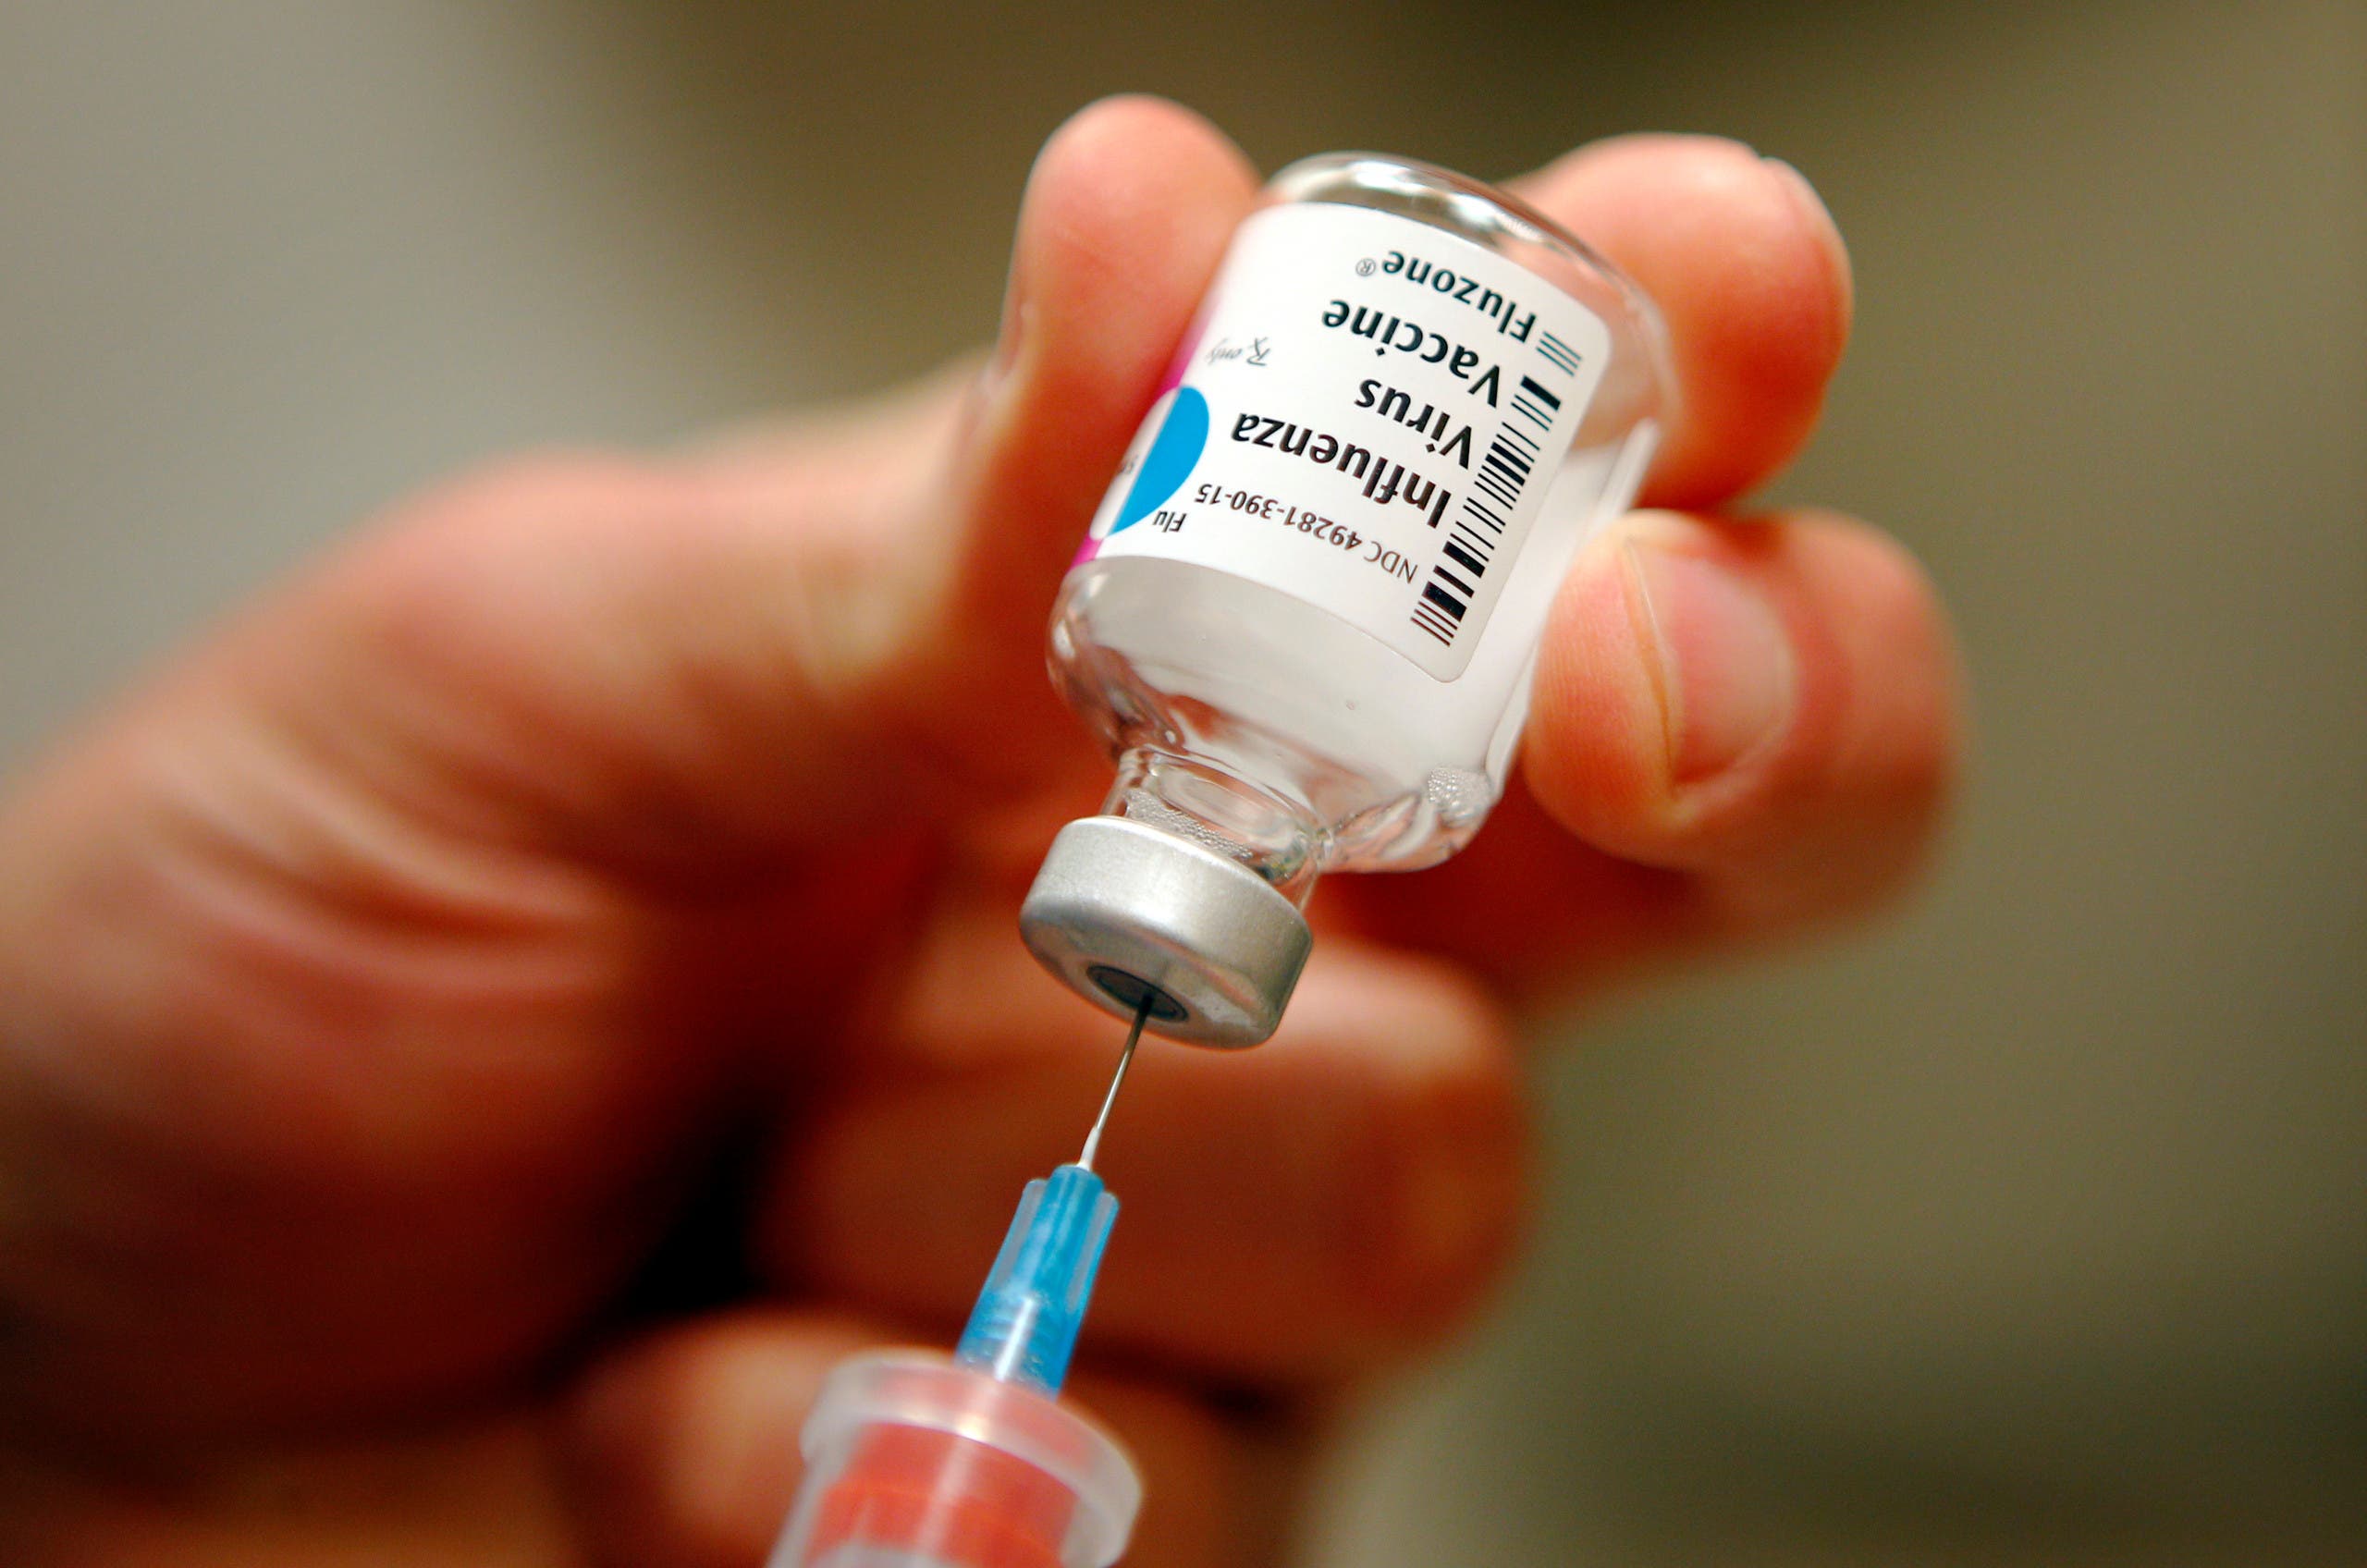 A nurse prepares an injection of the influenza vaccine. (File photo: Reuters)